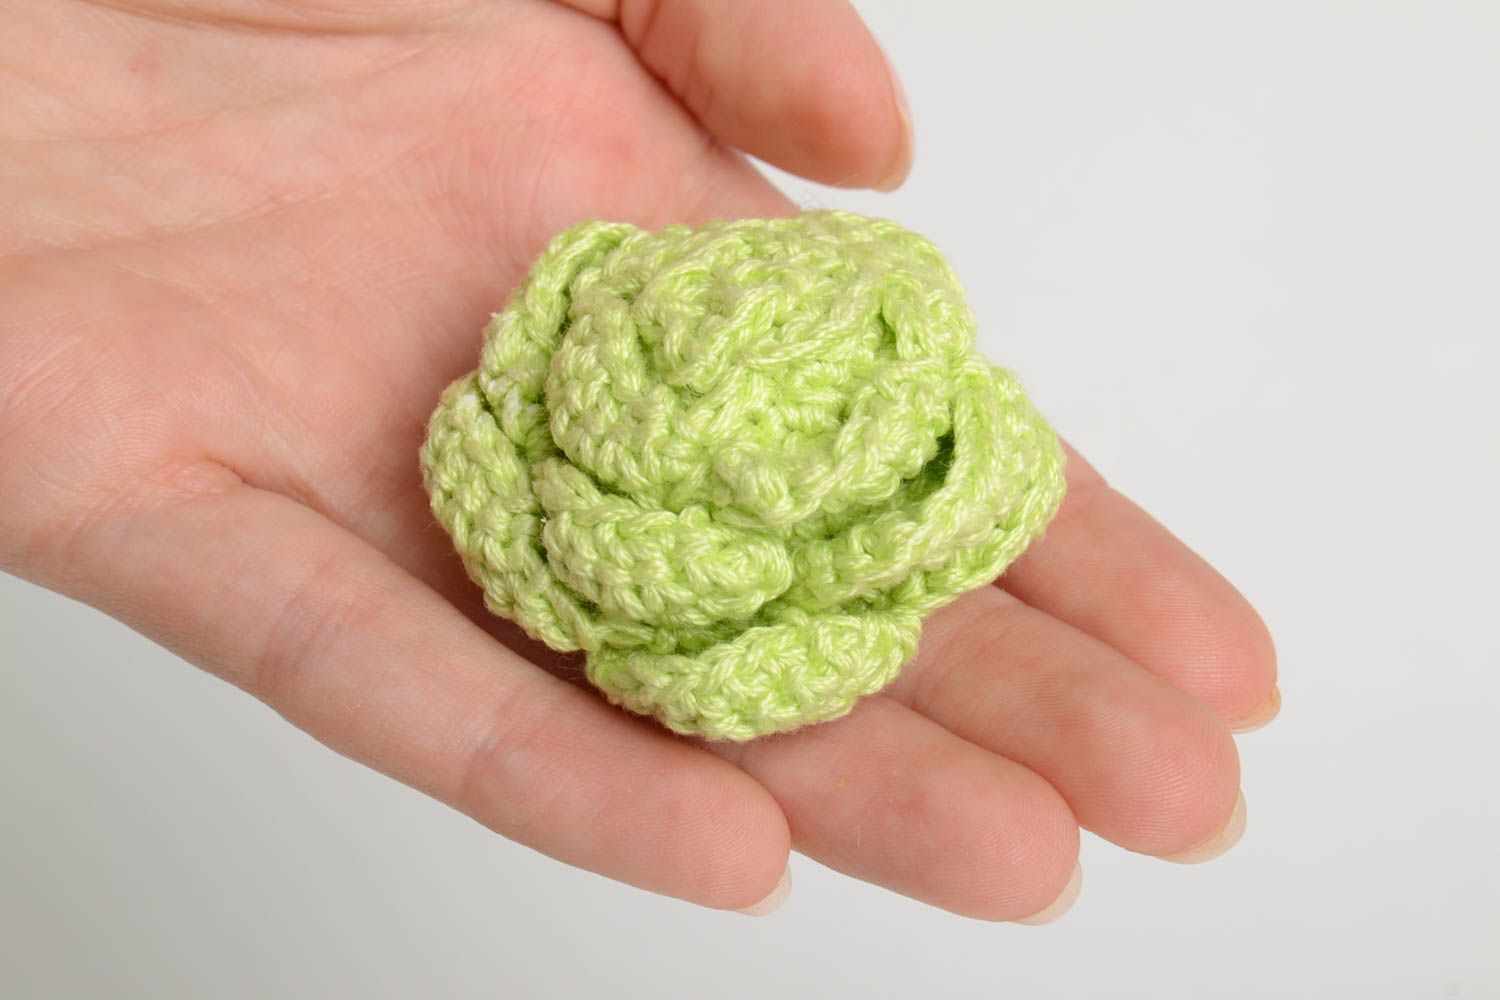 Crocheted textile cabbage handmade stylish vegetable kids cute soft toy  photo 5